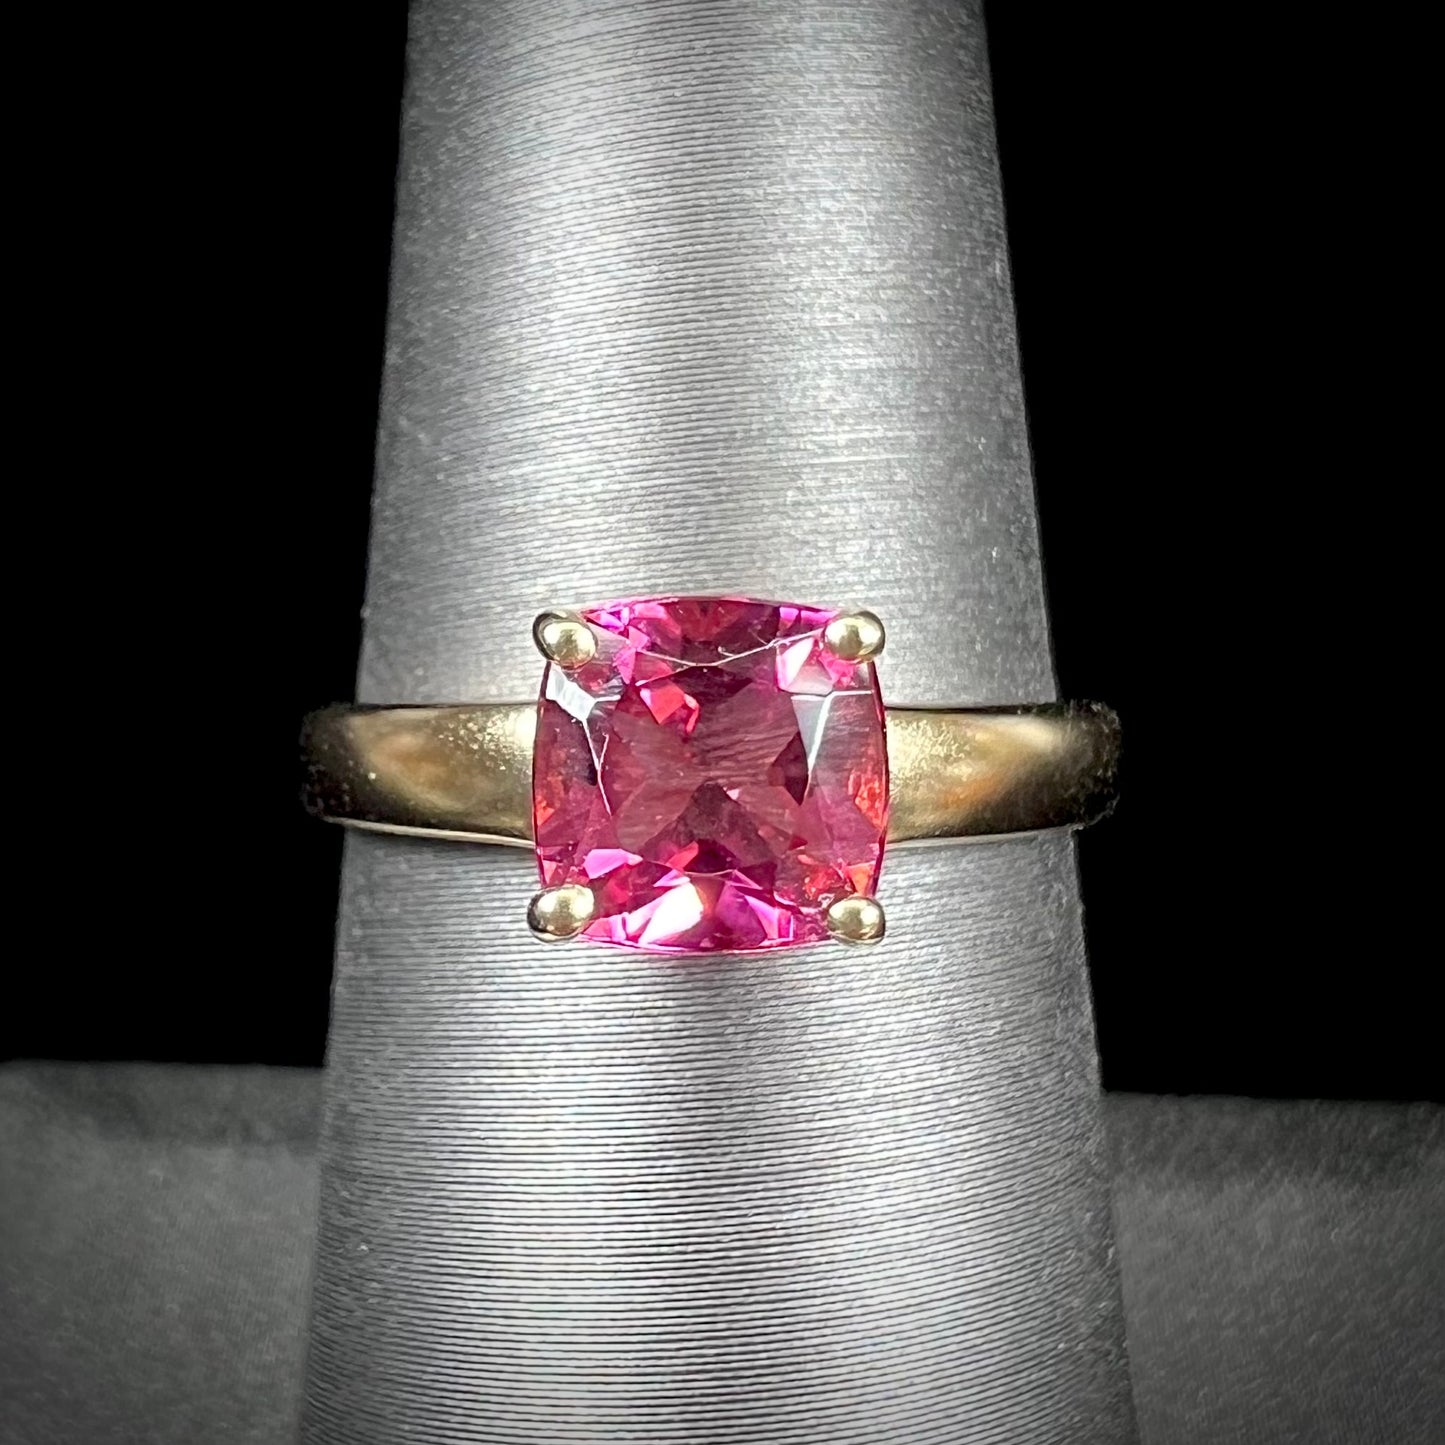 A ladies' cushion cut pink tourmaline solitaire ring in yellow gold.